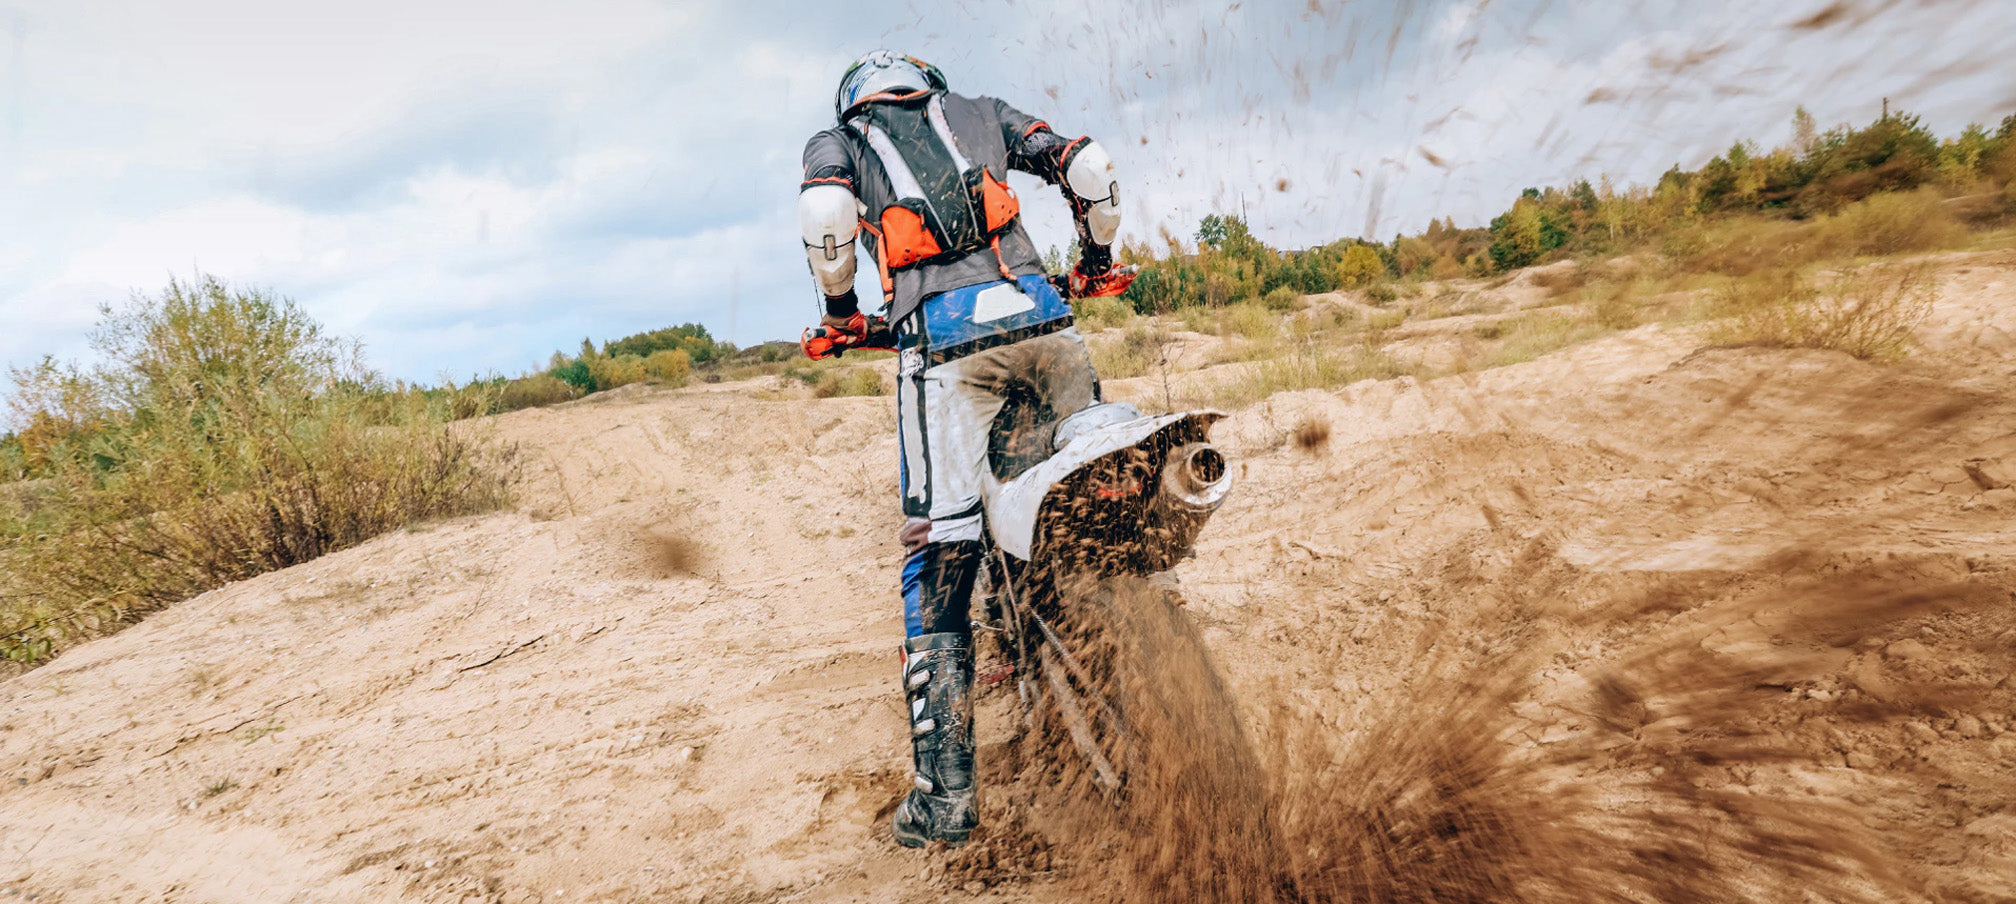 Dirt bike rider spinning tires in the mud, flinging dirt up towards the camera